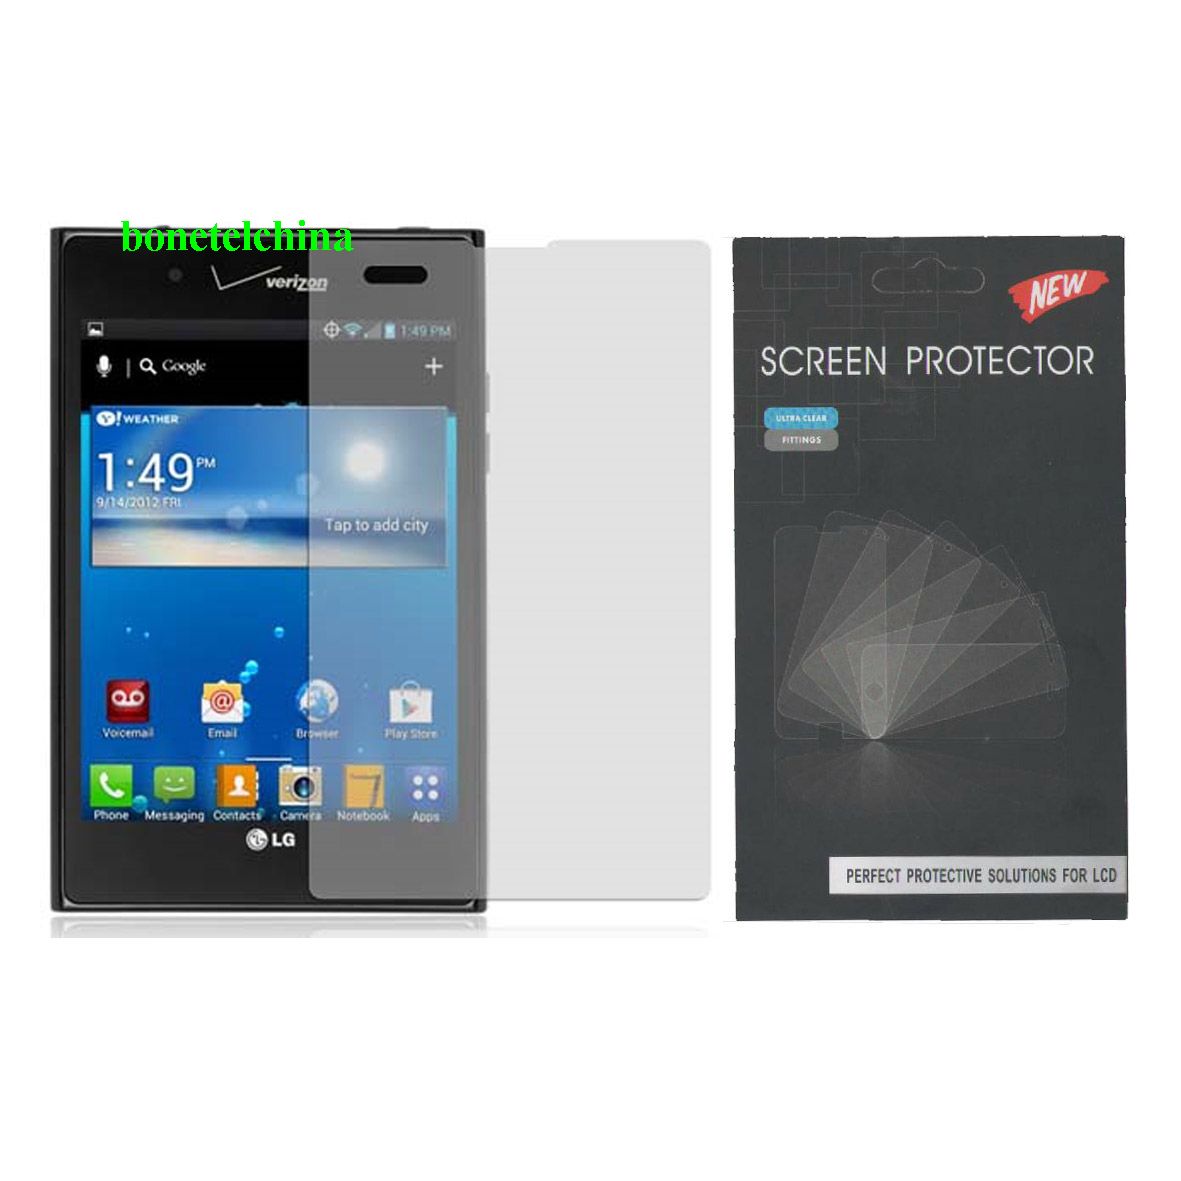 Screen Protector for LG VS950